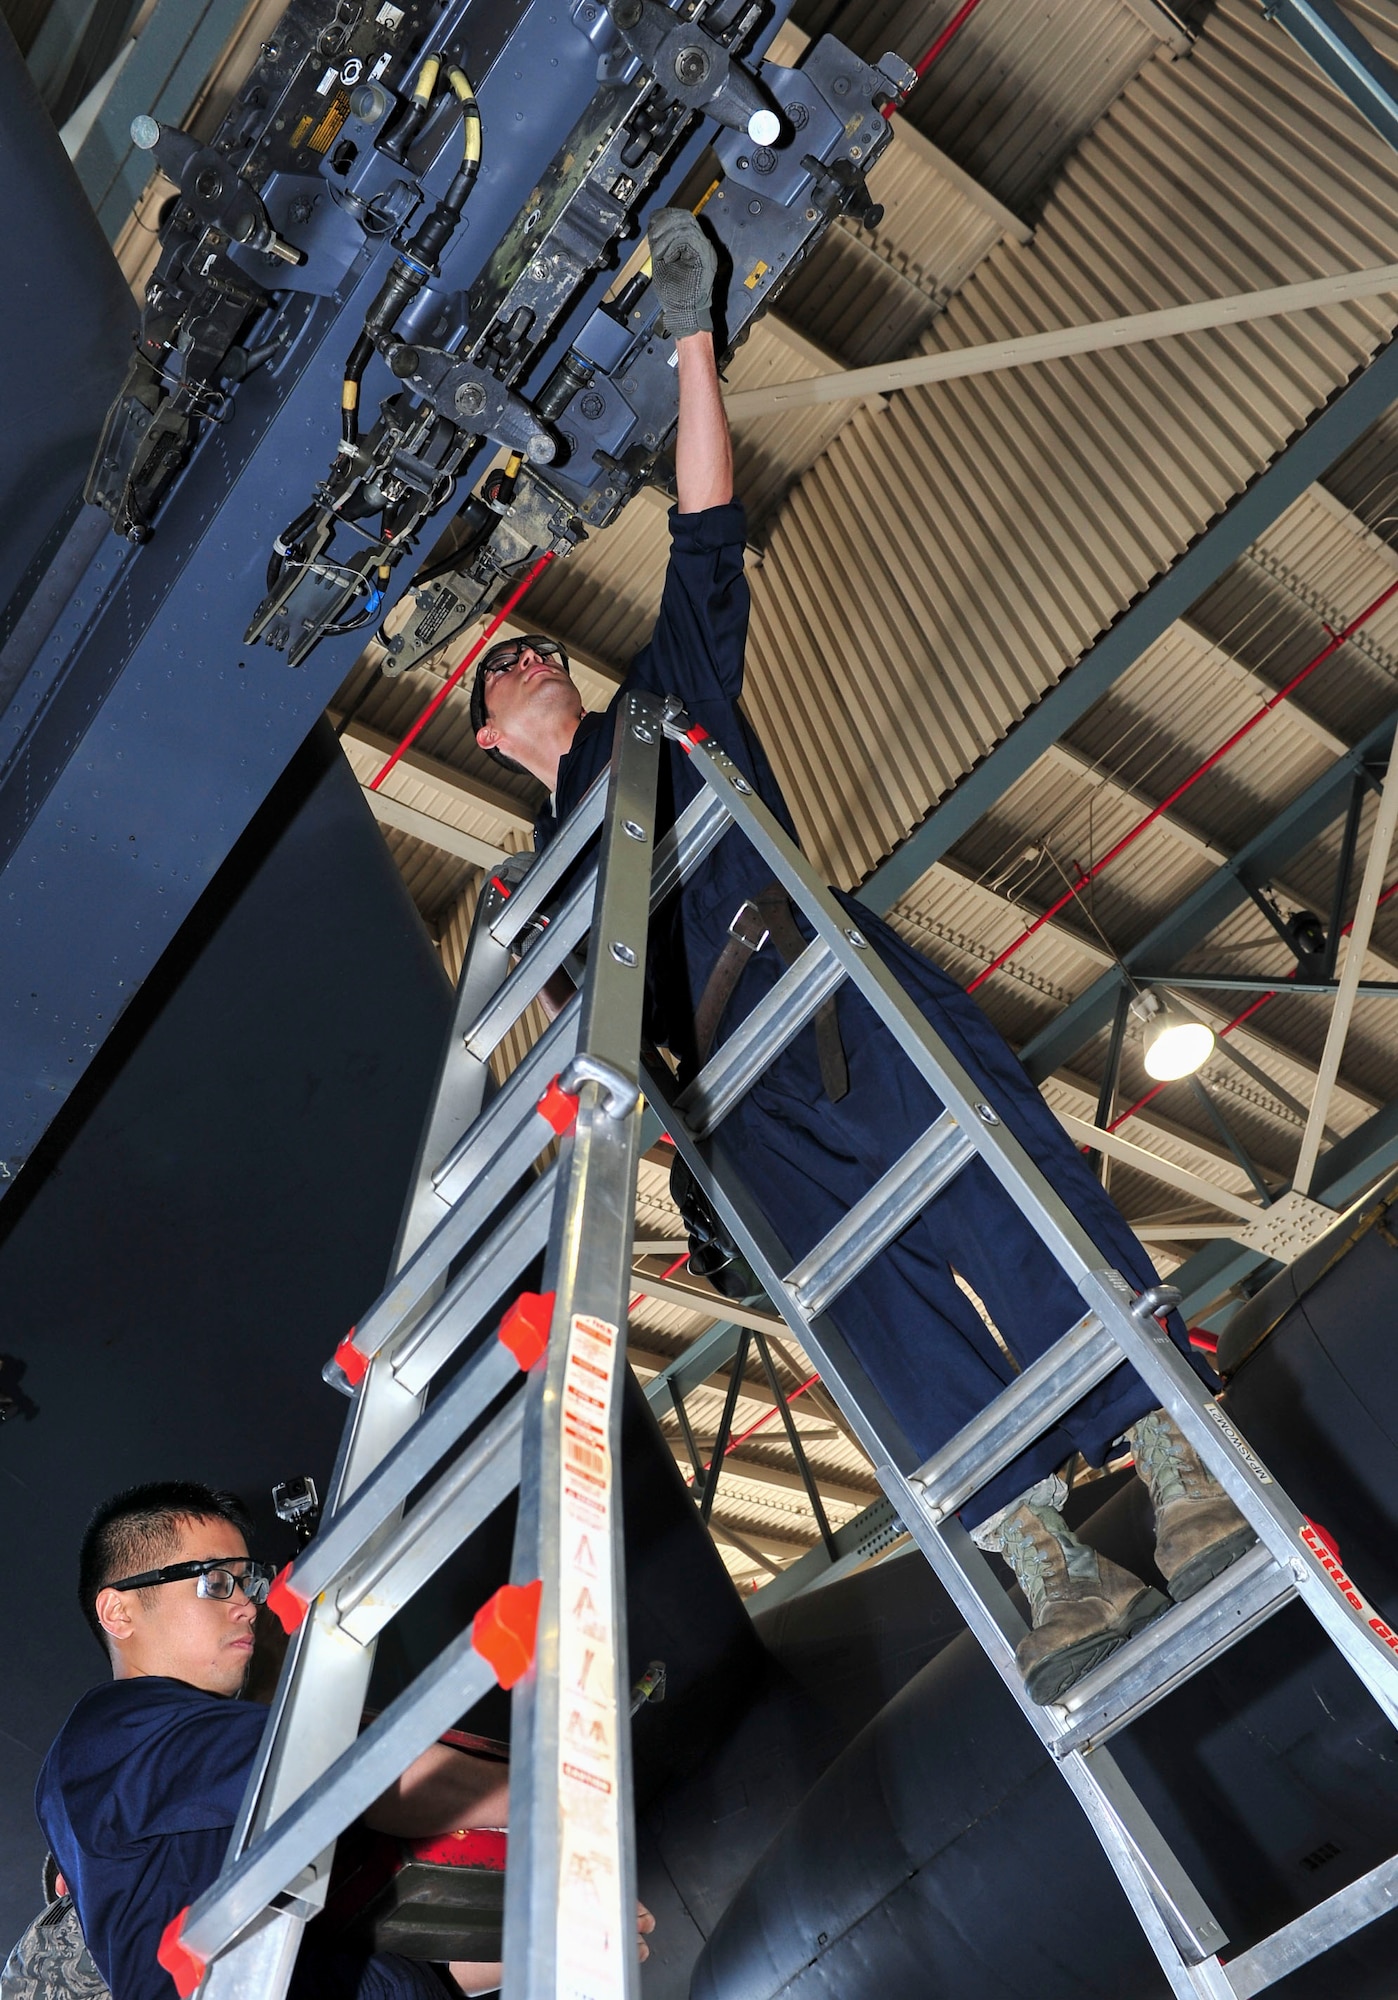 Senior Airman Alex Jimenez, 5th Aircraft Maintenance Squadron weapons load crew member, works with his team to load four weapon systems onto a B-52H Stratofortress at Minot Air Force Base, N.D., Aug. 24, 2015. Jimenez and his team were tested on their ability to quickly, safely and effectively load the weapons as part of Air Force Global Strike Command’s Global Strike Challenge Competition. (U.S. Air Force photo/Senior Airman Stephanie Morris)